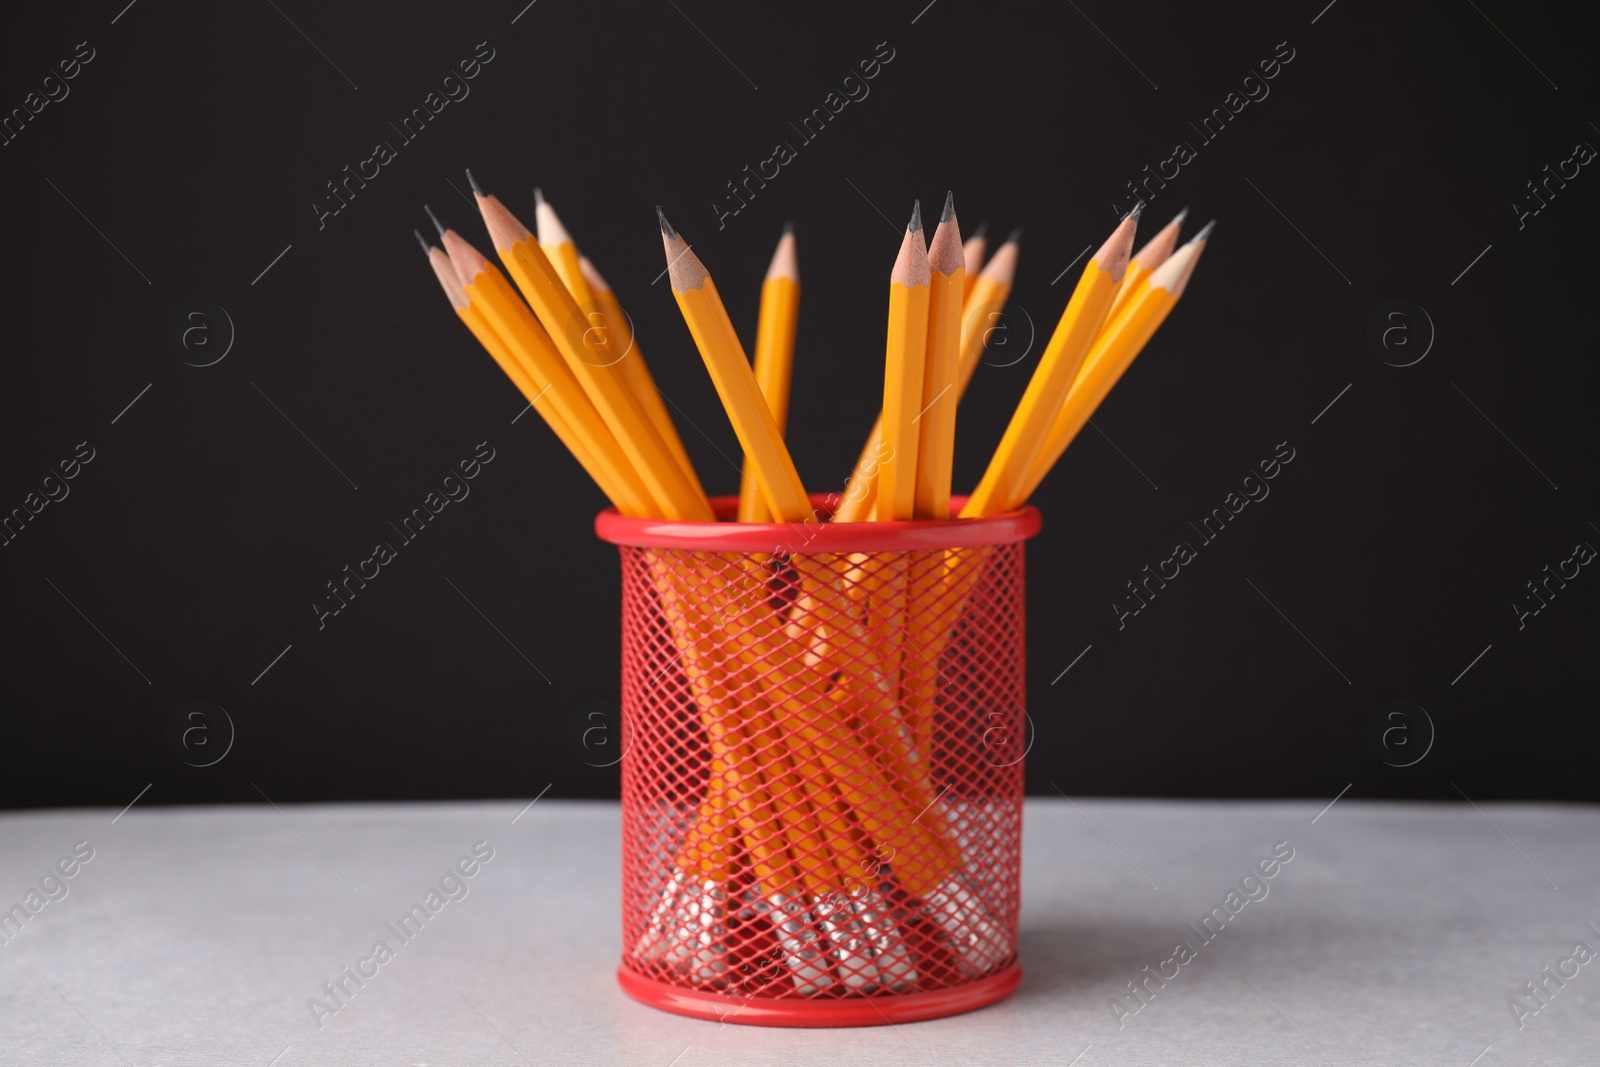 Photo of Many sharp pencils in holder on light table against black background